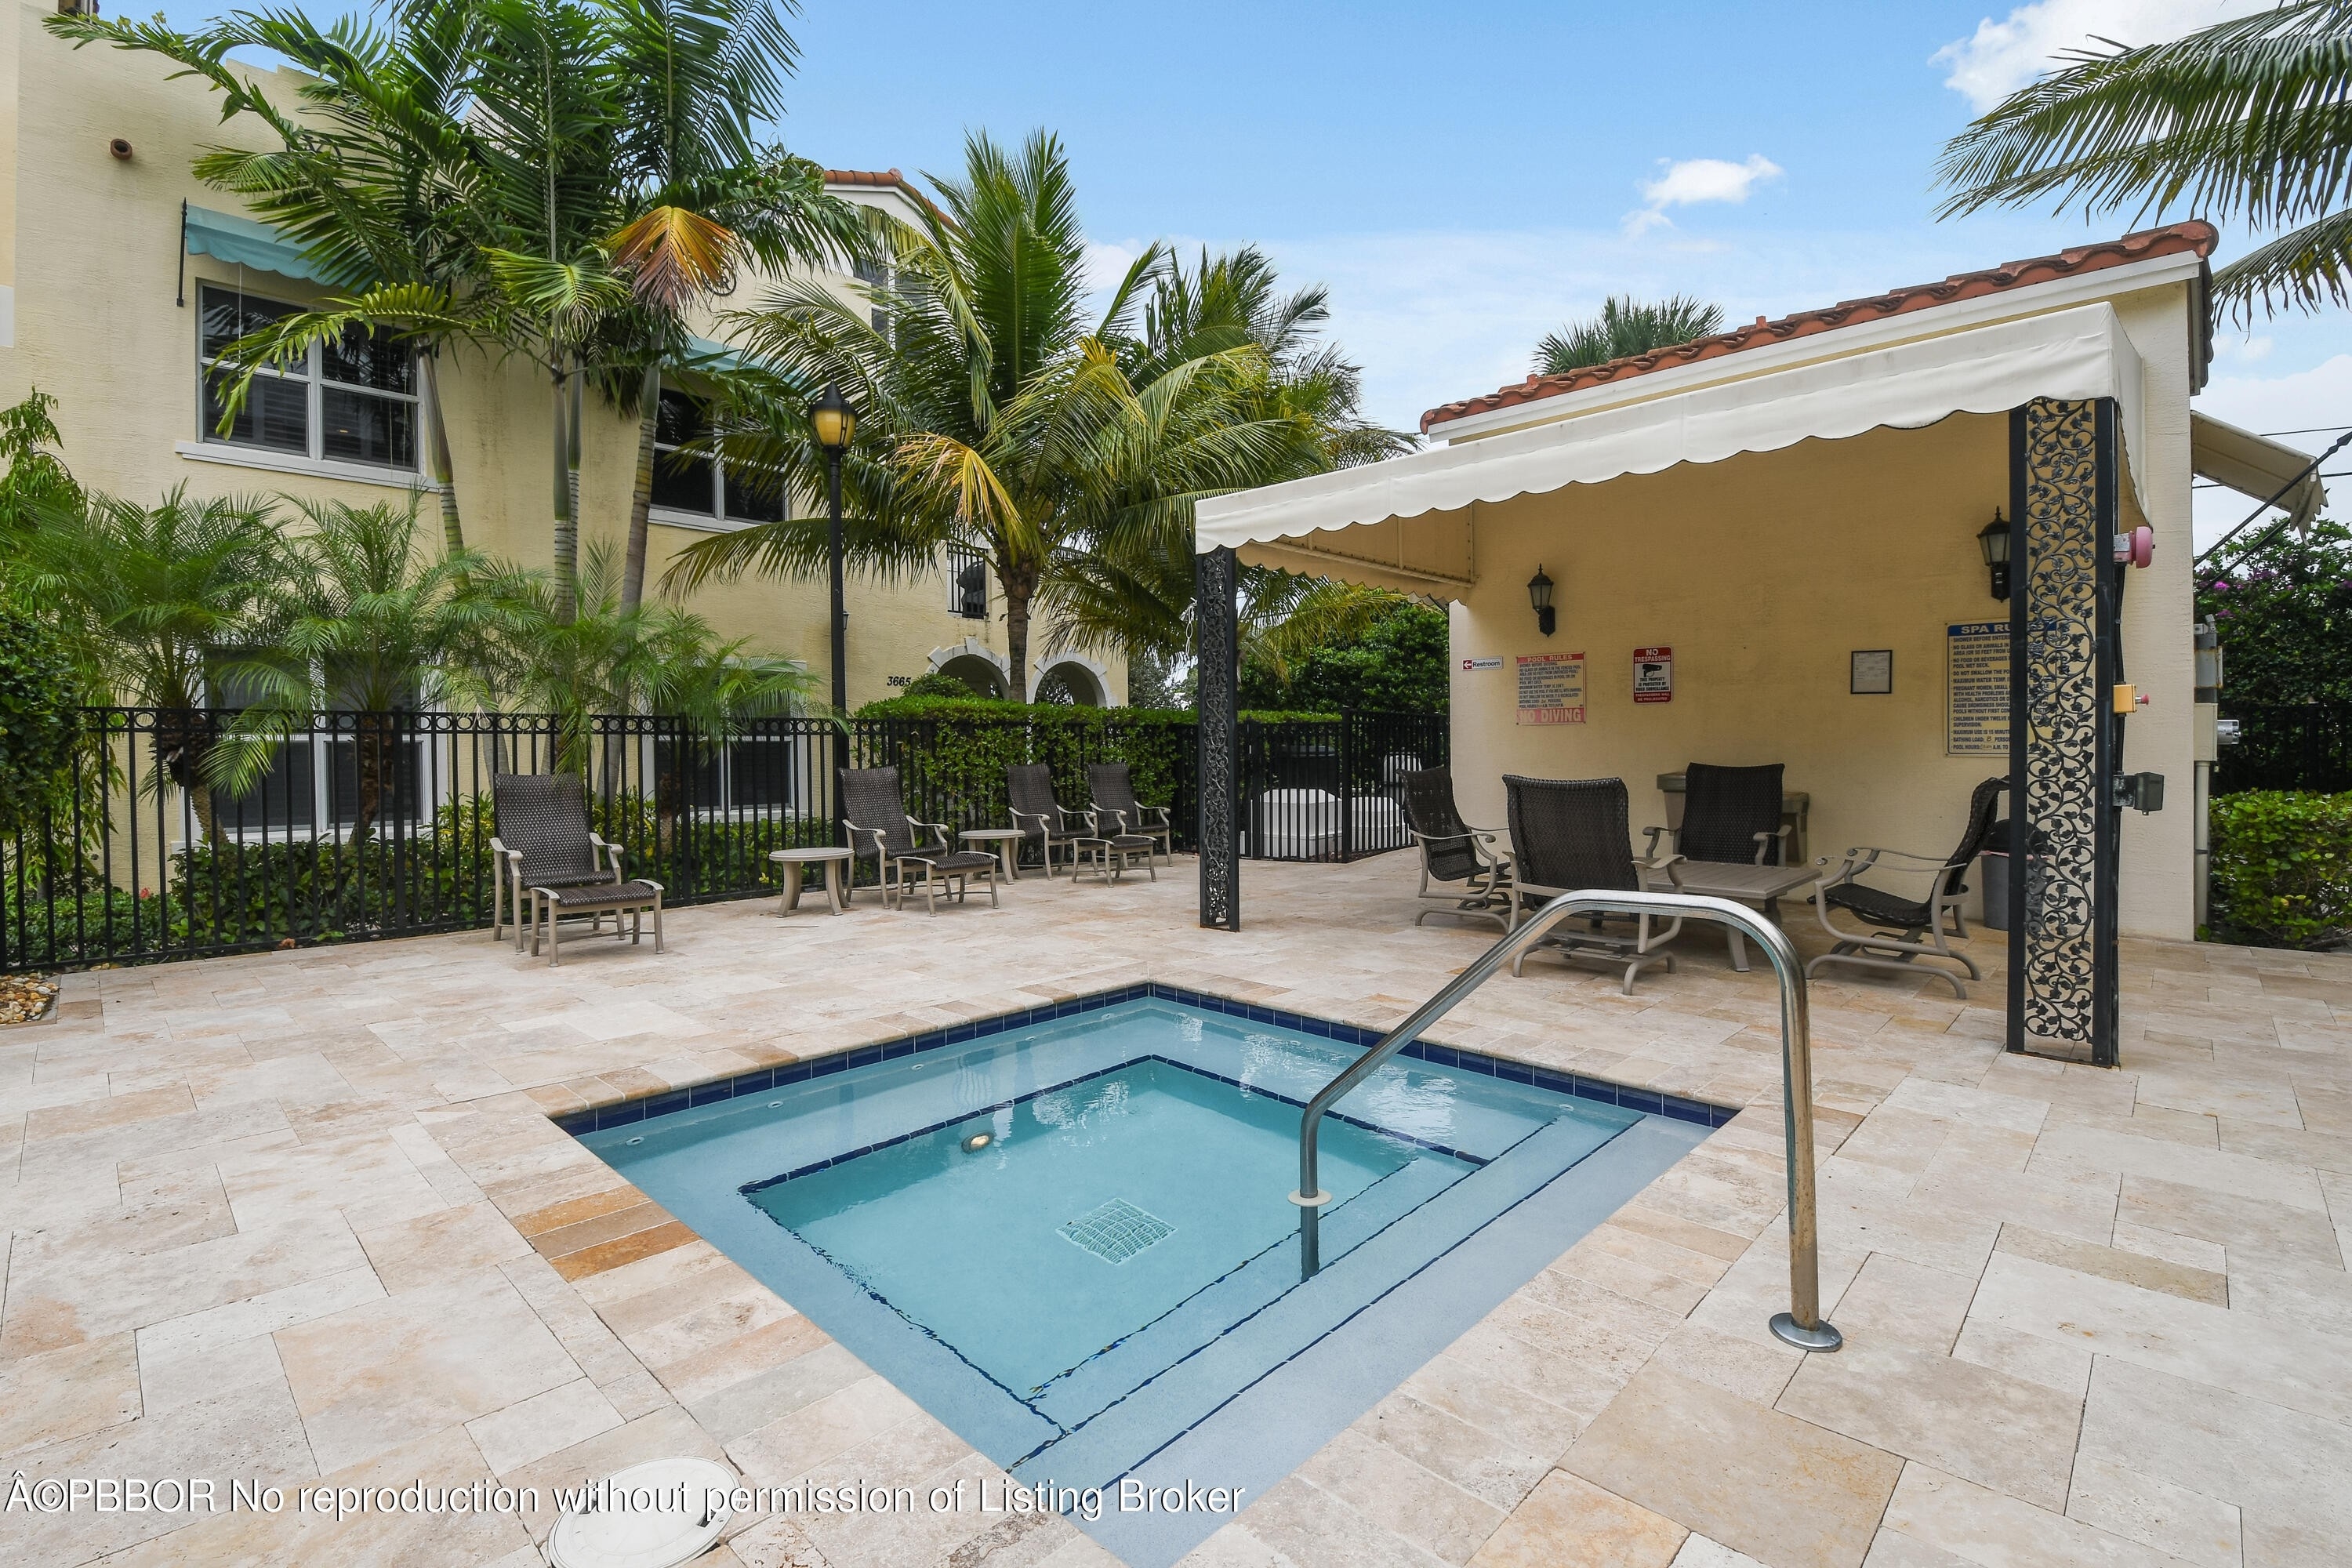 33. Single Family Townhouse for Sale at 3664 Voaro Way, 18 Central Park, West Palm Beach, FL 33405